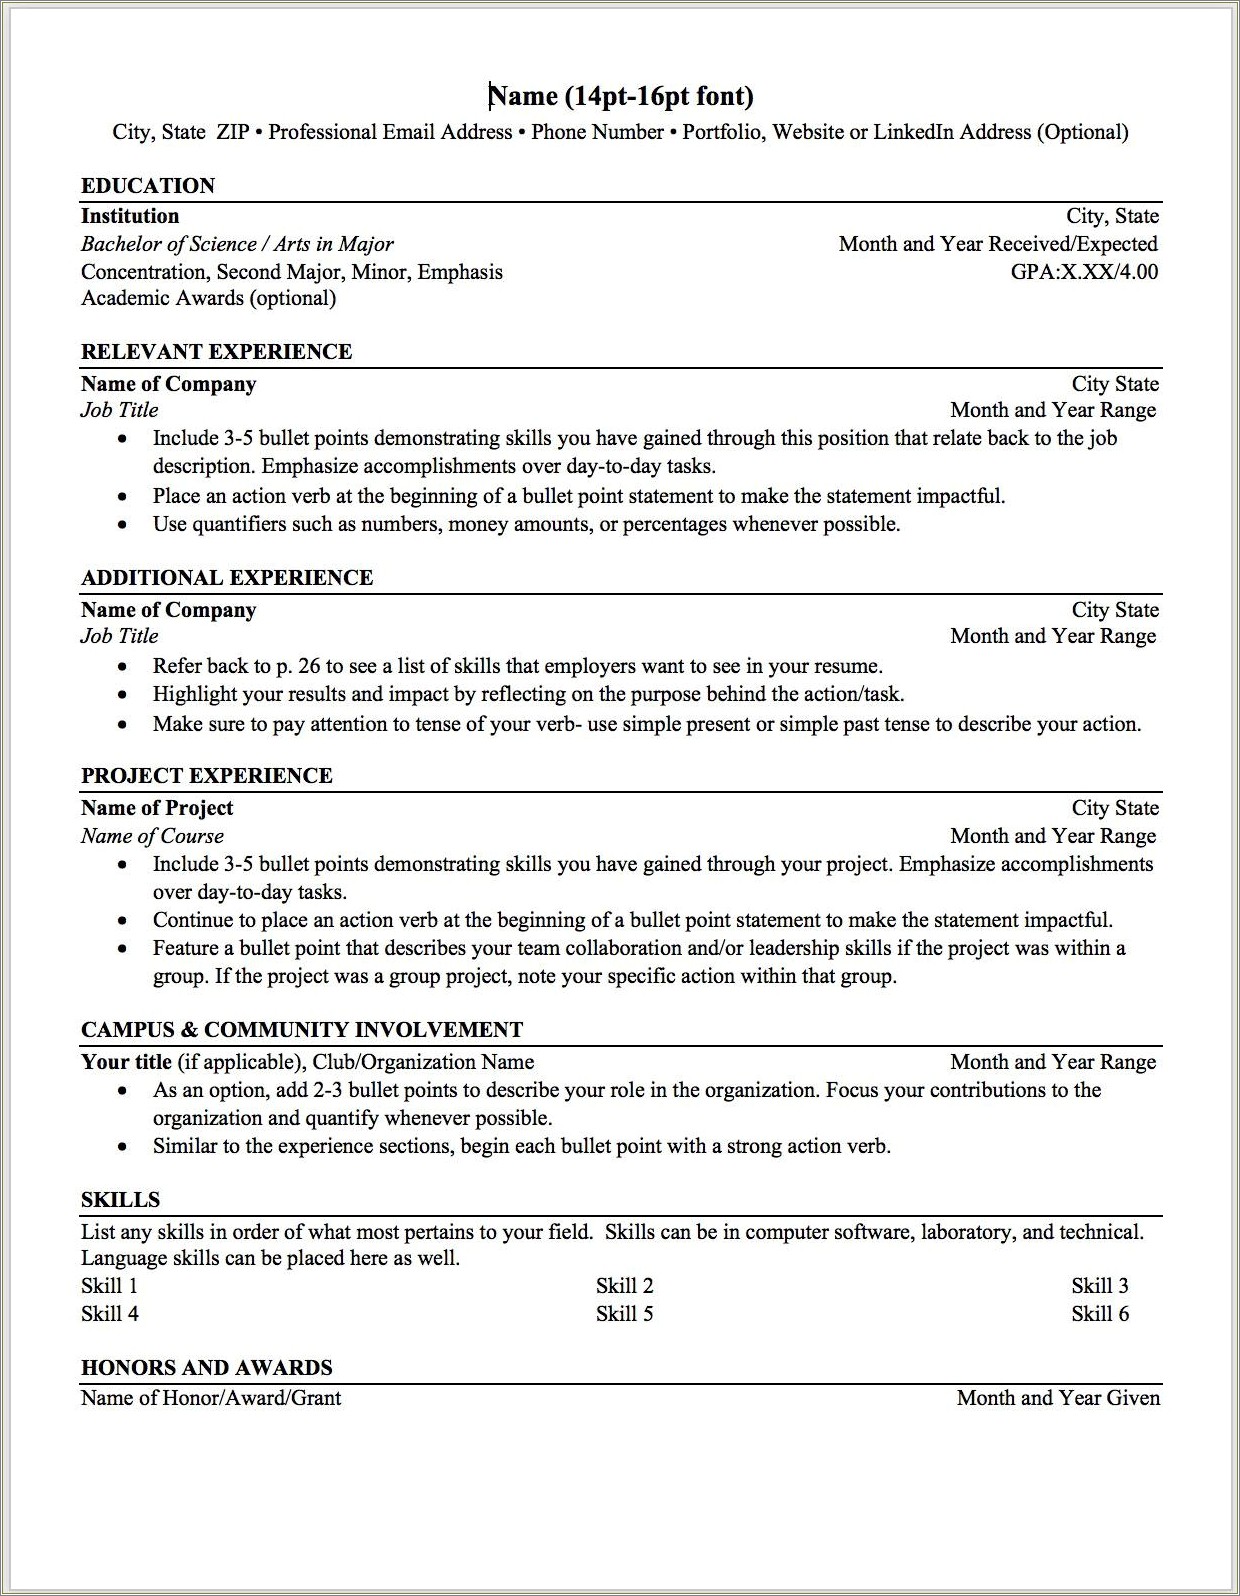 National Technical Honor Society Application Resume Template